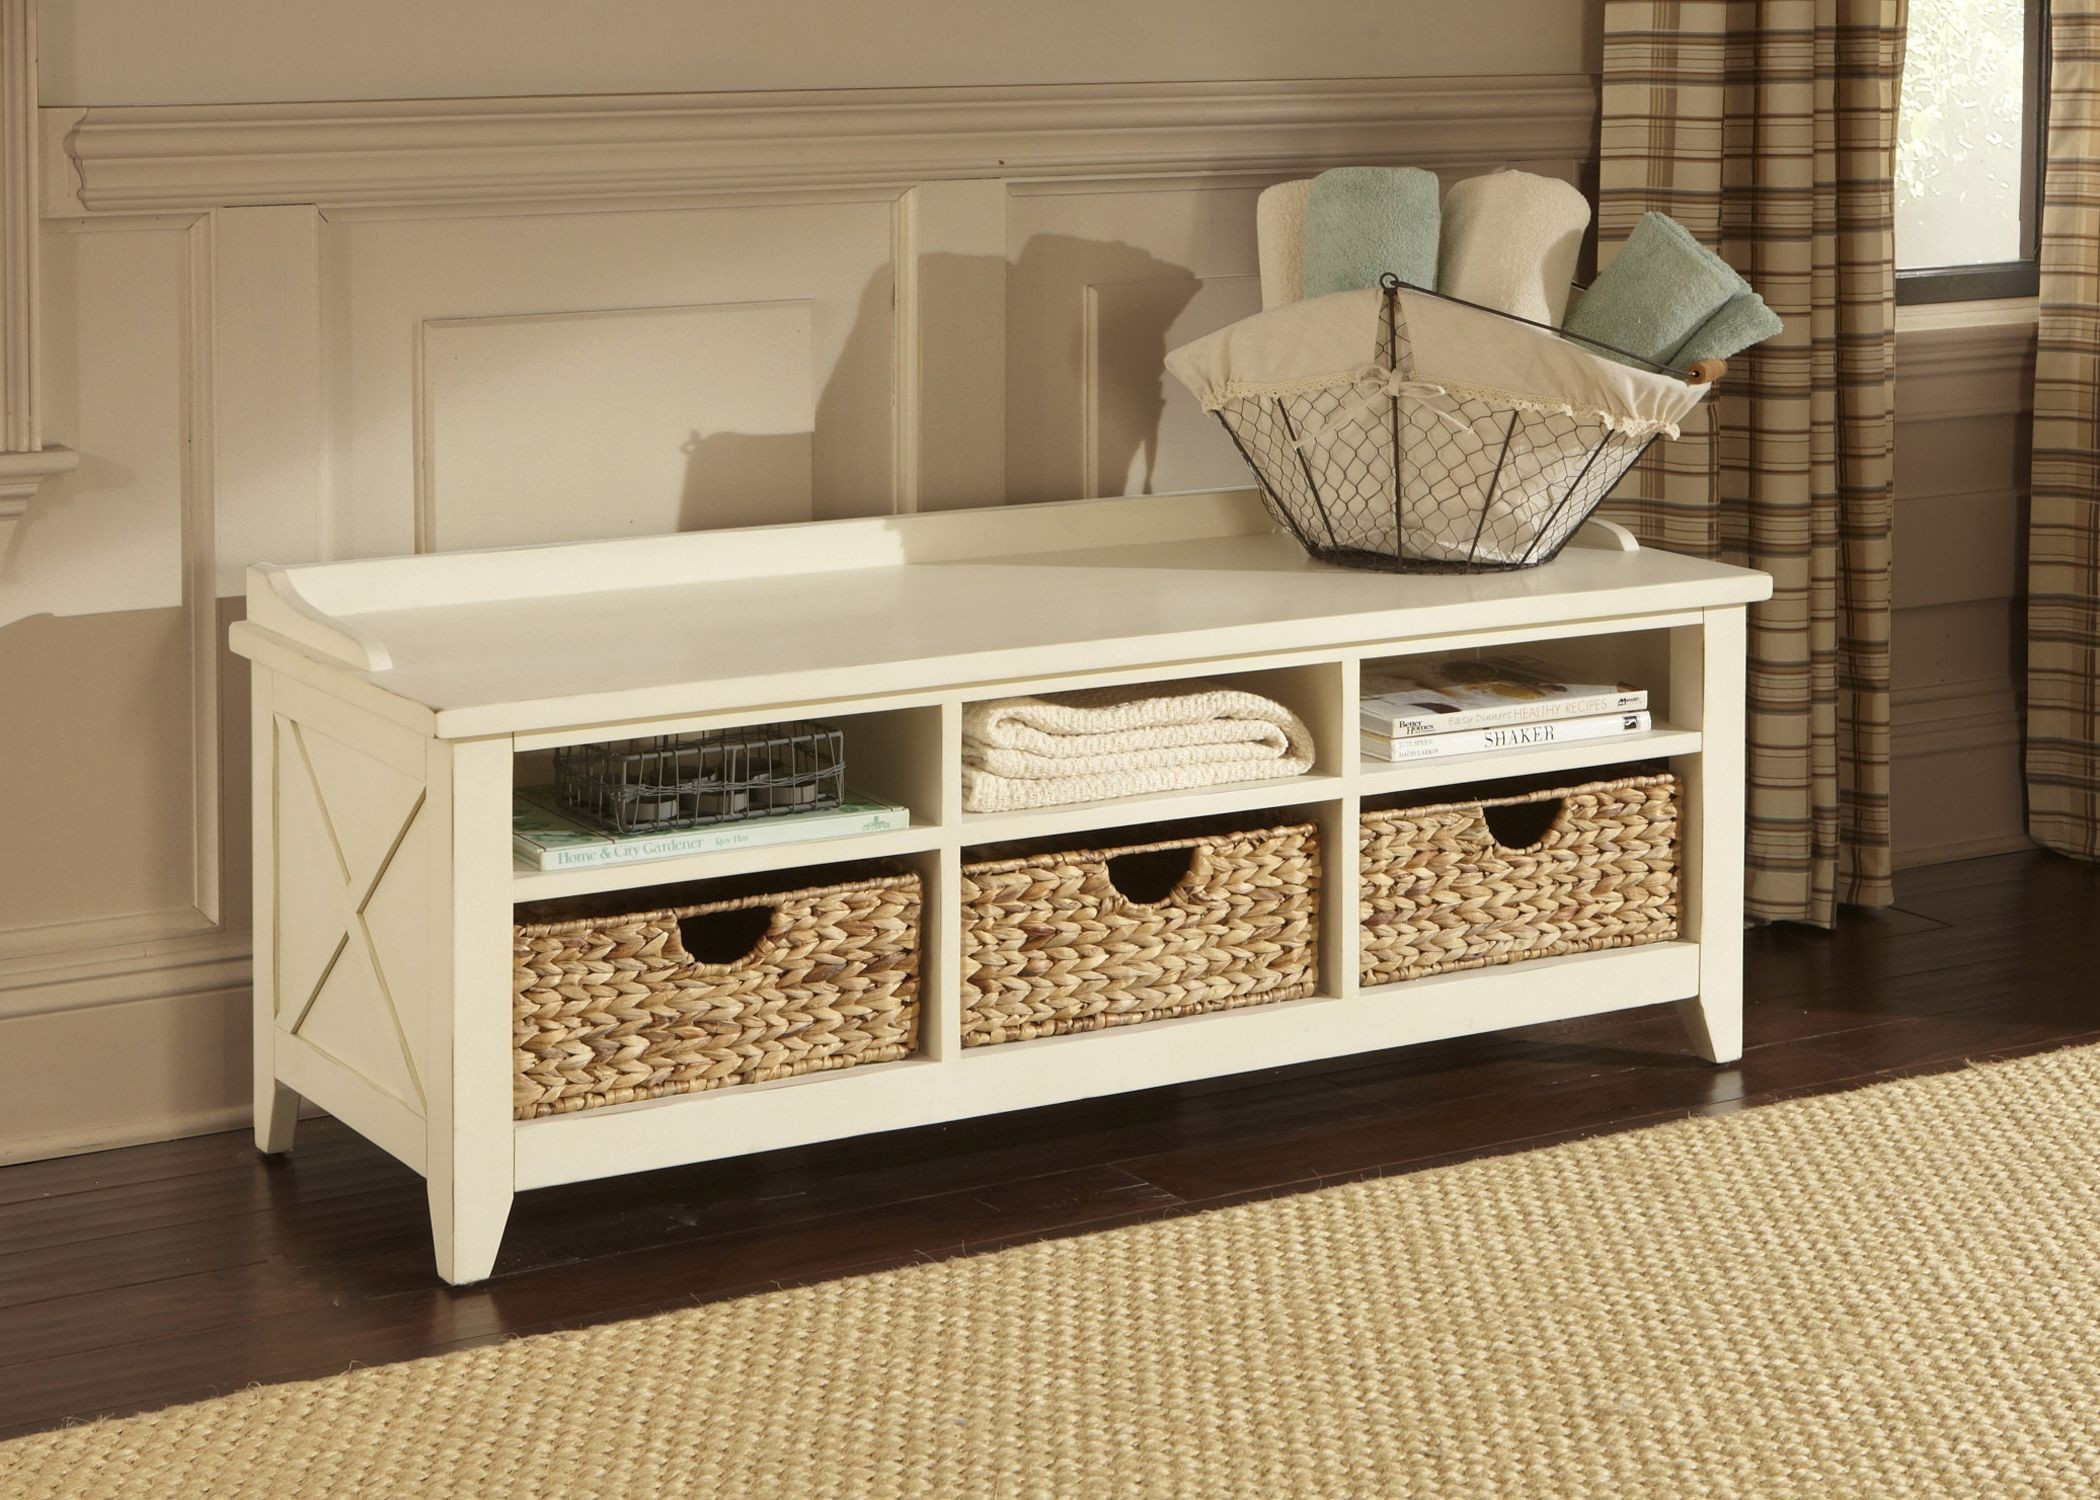 White Cubby Storage Bench
 Hearthstone Rustic White Cubby Storage Bench from Liberty